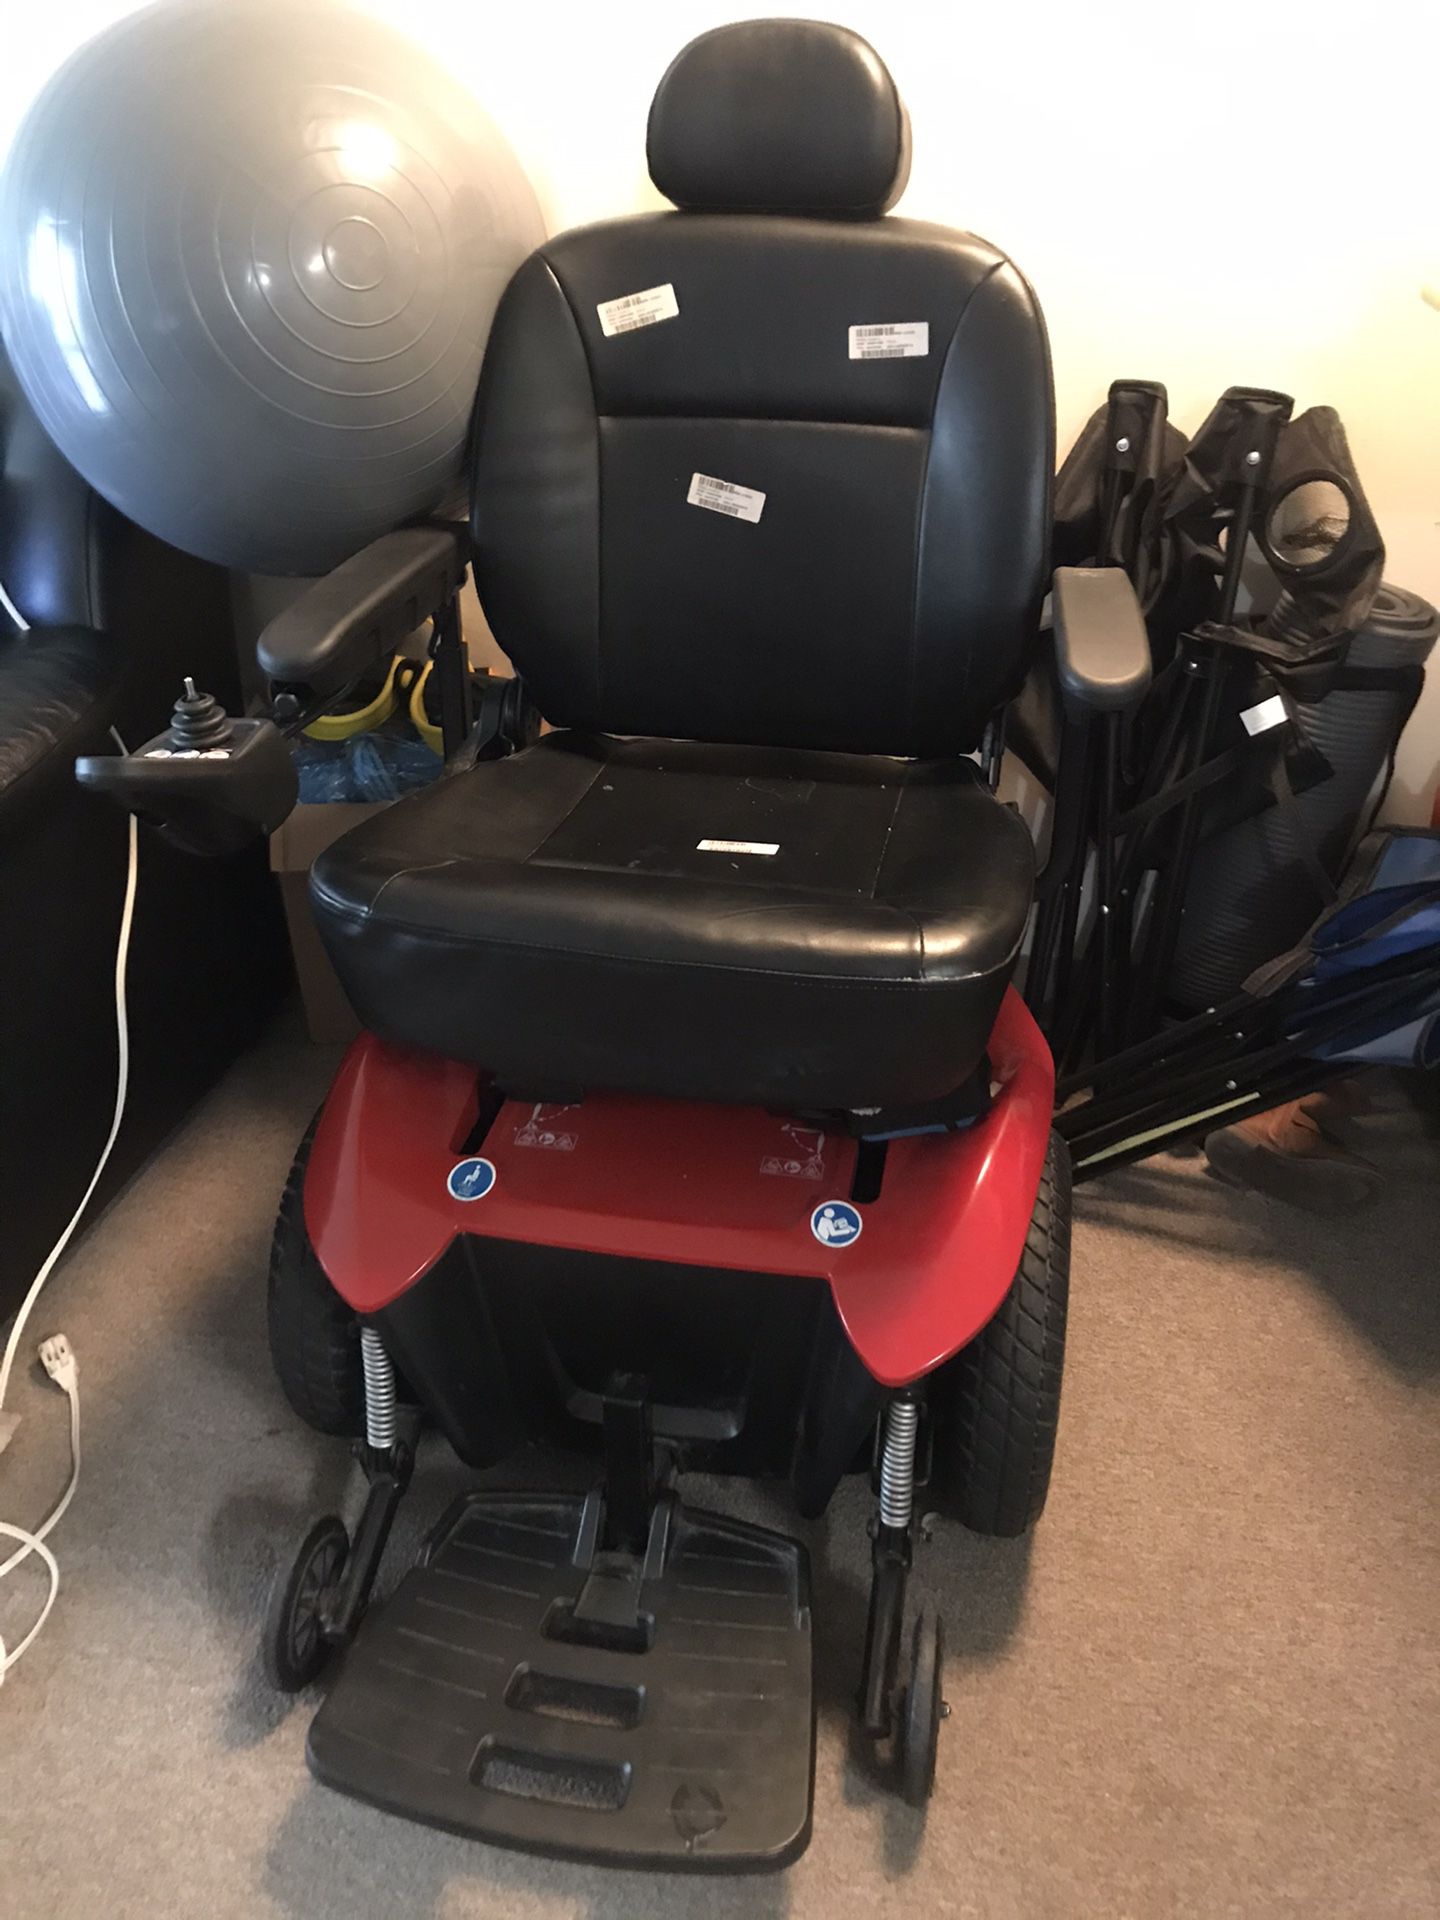 PRIDE JAZZY SELECT HD Electric Power Mobility chair Wheelchair 450lbs Max Weight